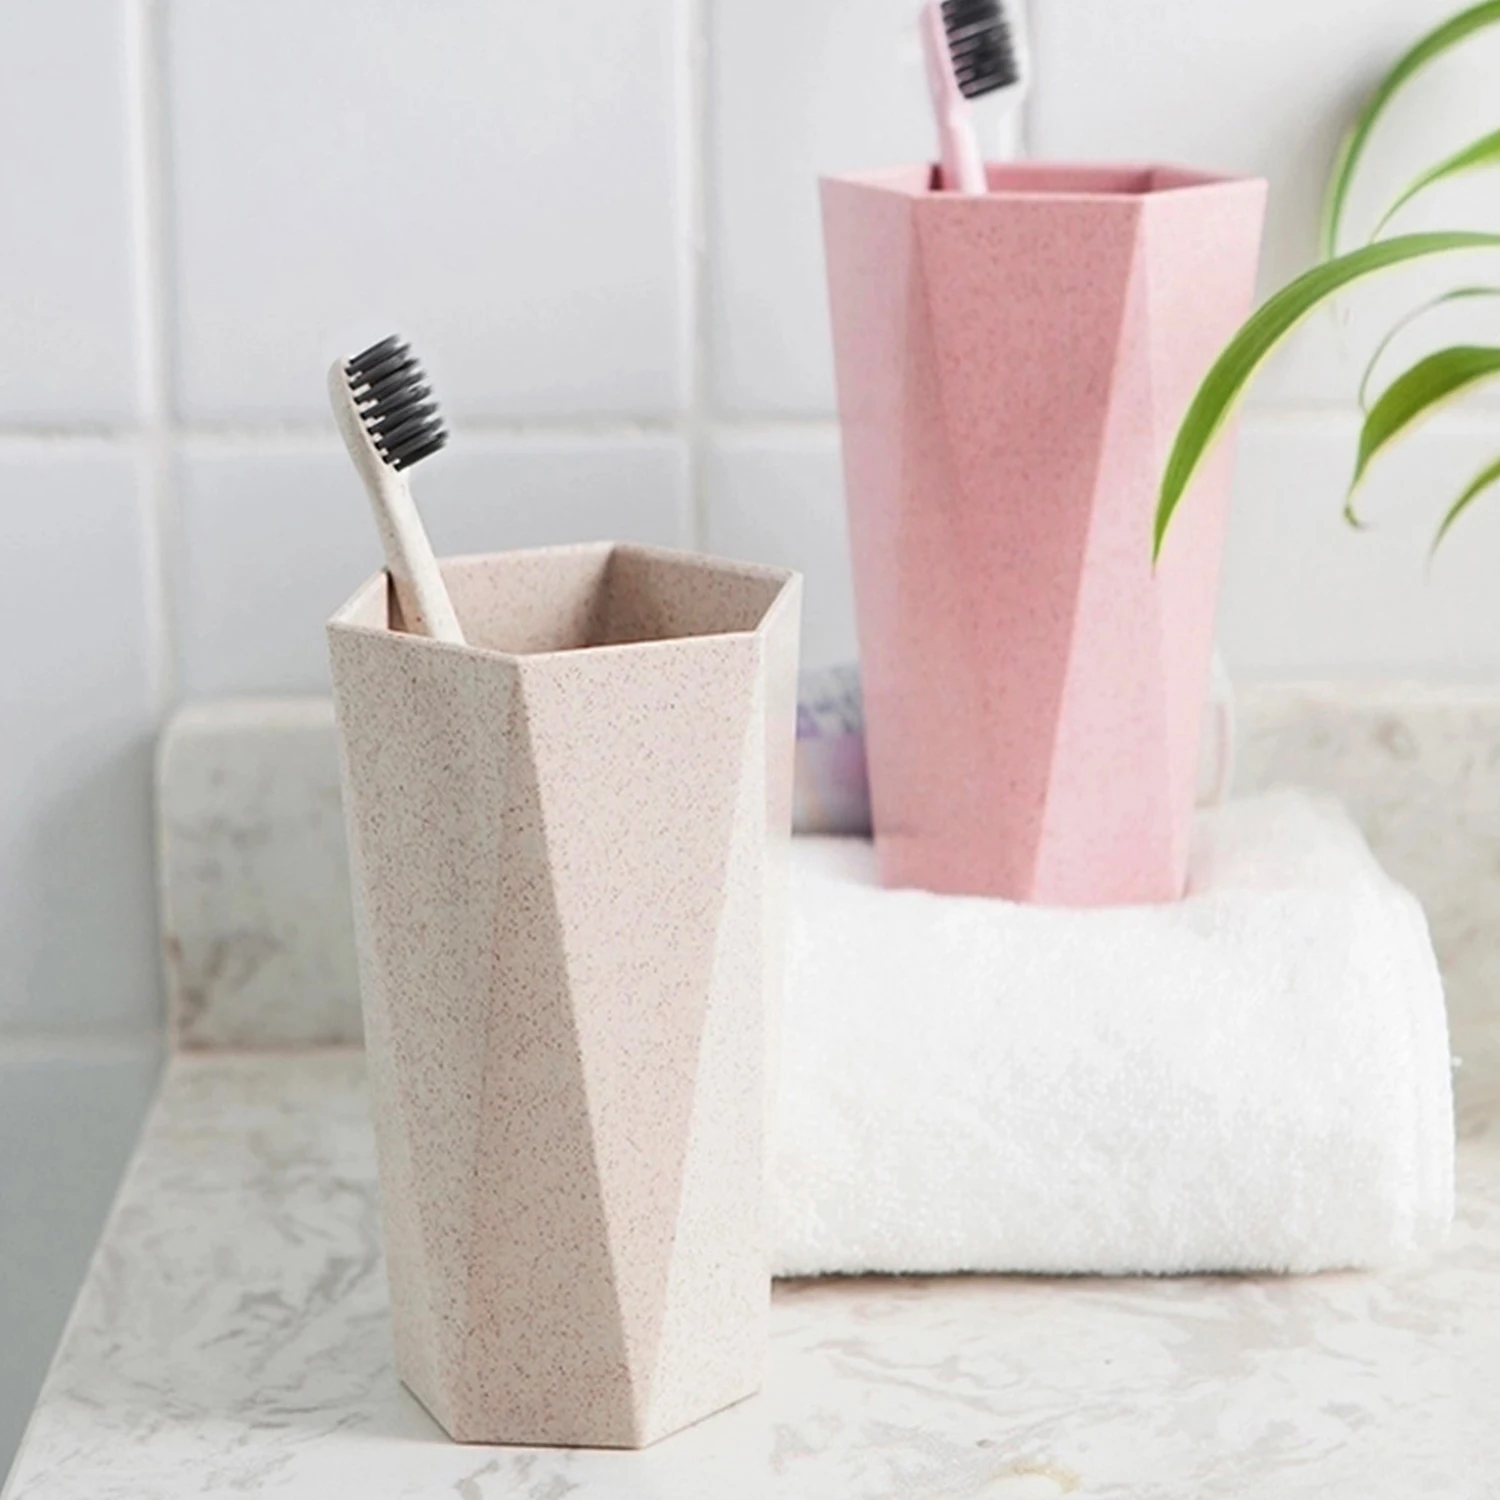 

Home Creative Simple Tooth Cylinder Brushing Cup Female Couple Diamond Portable Mouthwash Toothbrush Cup Bath Room Accessories